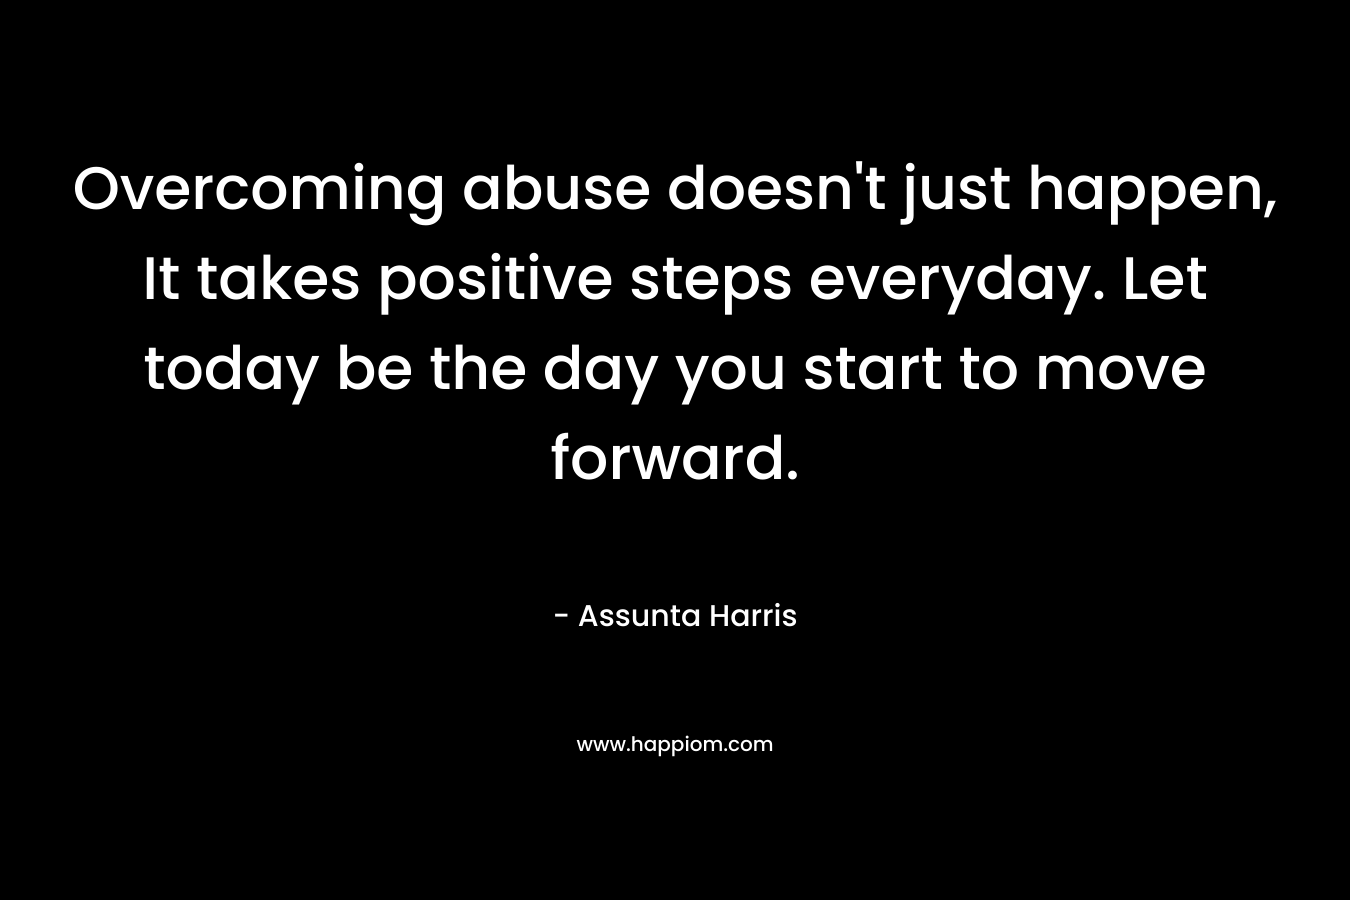 Overcoming abuse doesn’t just happen, It takes positive steps everyday. Let today be the day you start to move forward. – Assunta Harris